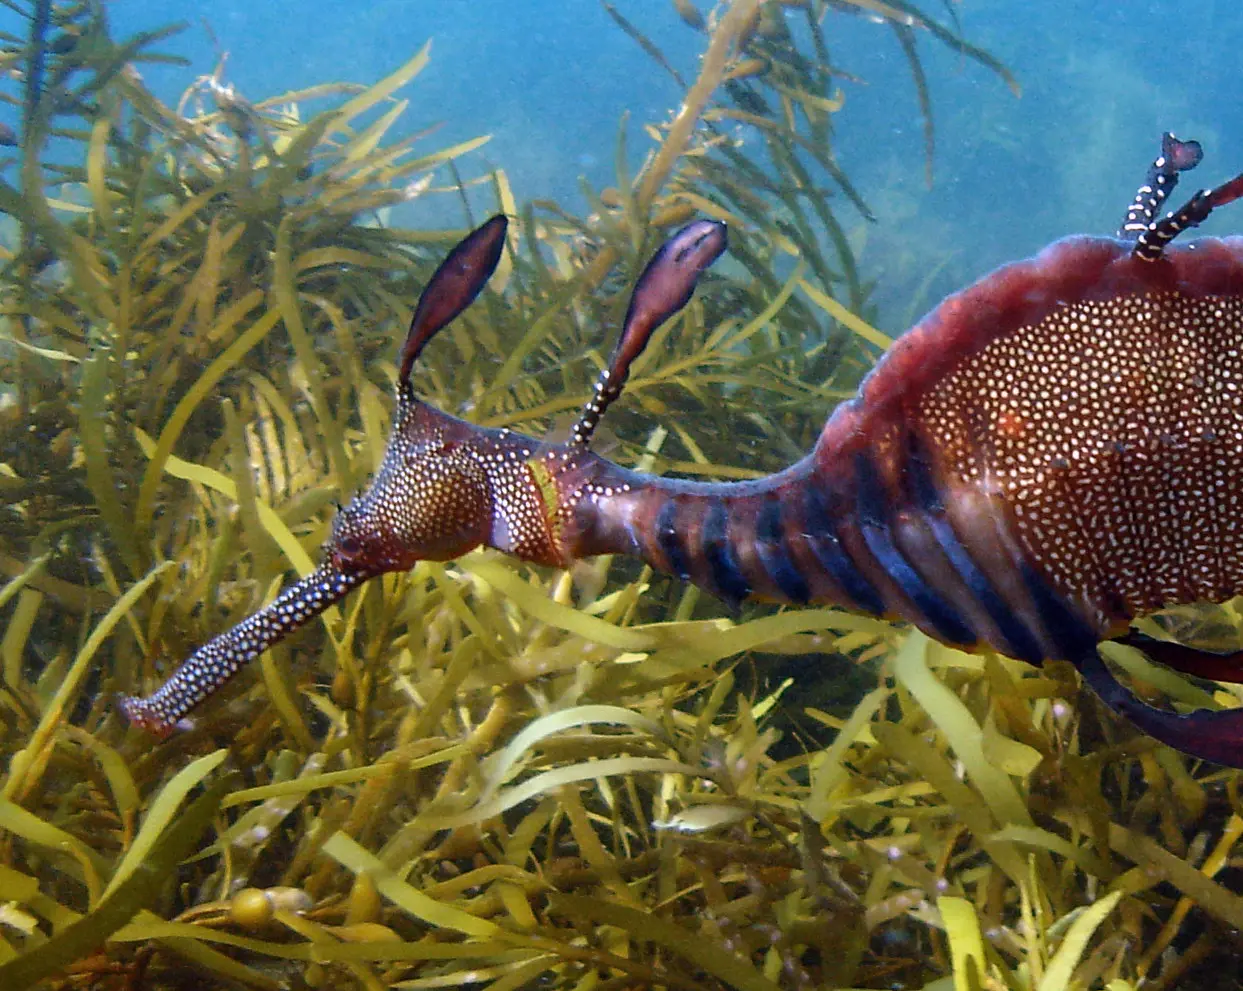 A red sea dragon with blue stripes and fine yellow spots swims above the seaweed in clear, shallow water. 